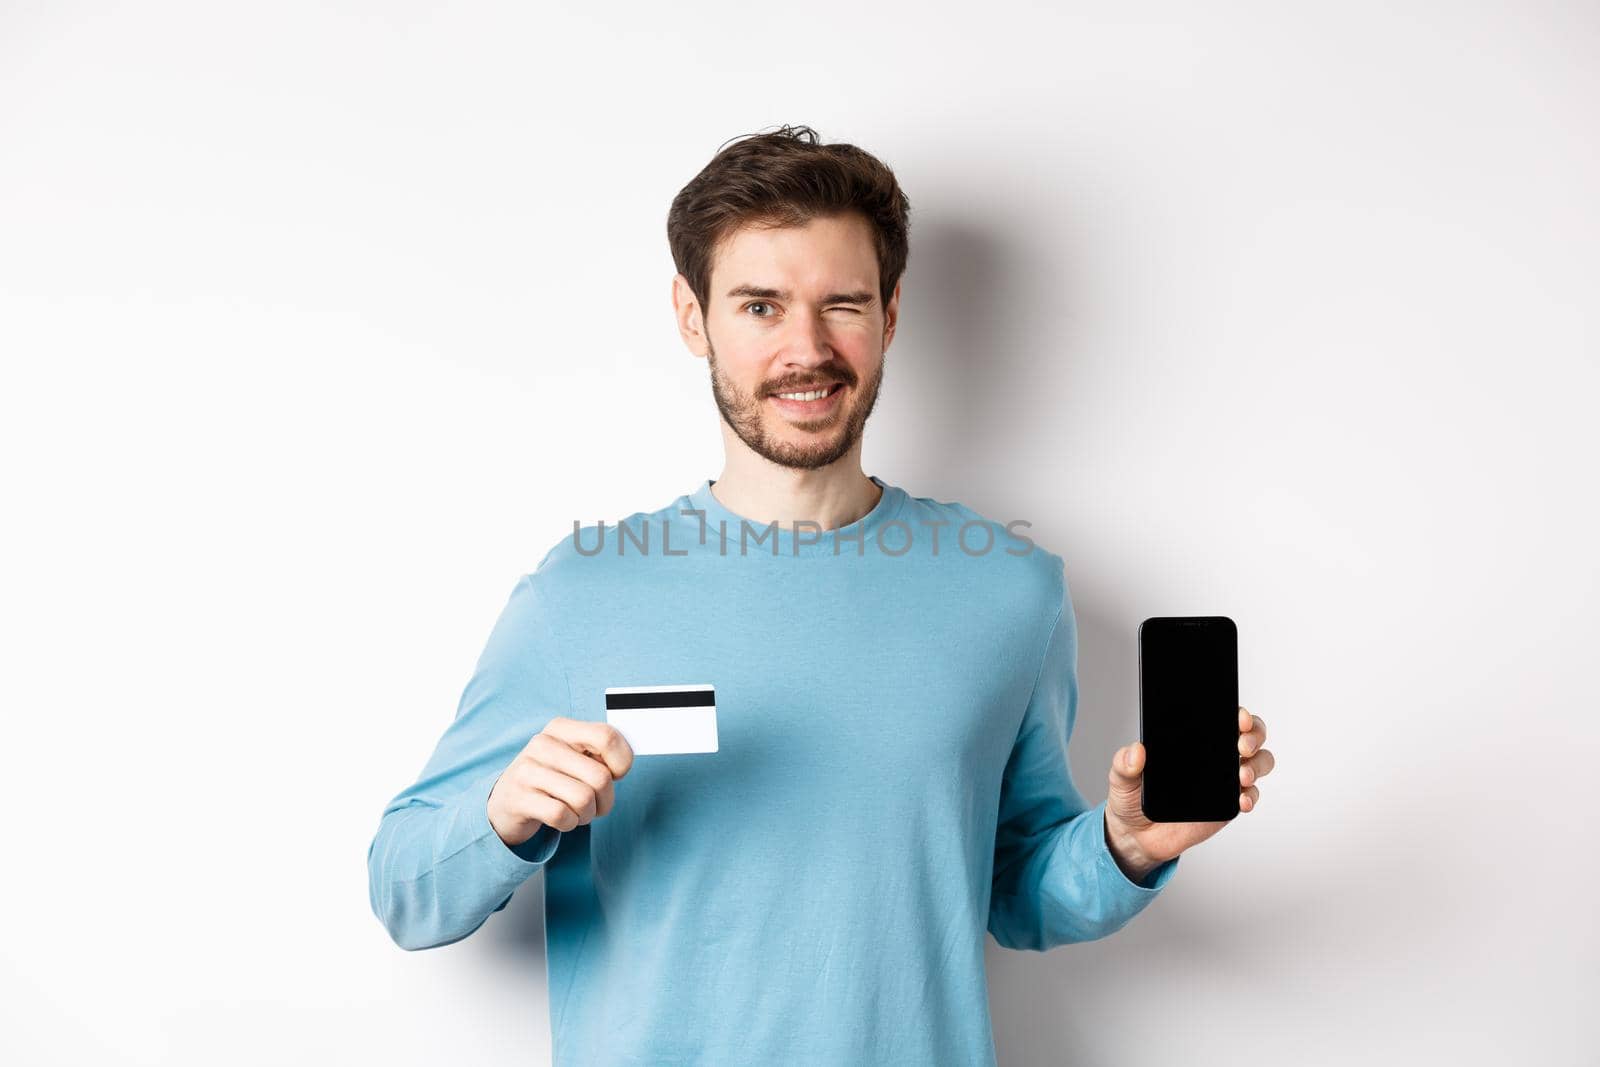 Young man in casual shirt showing empty smartphone screen and plastic credit card, winking and smiling at camera, standing on white background.